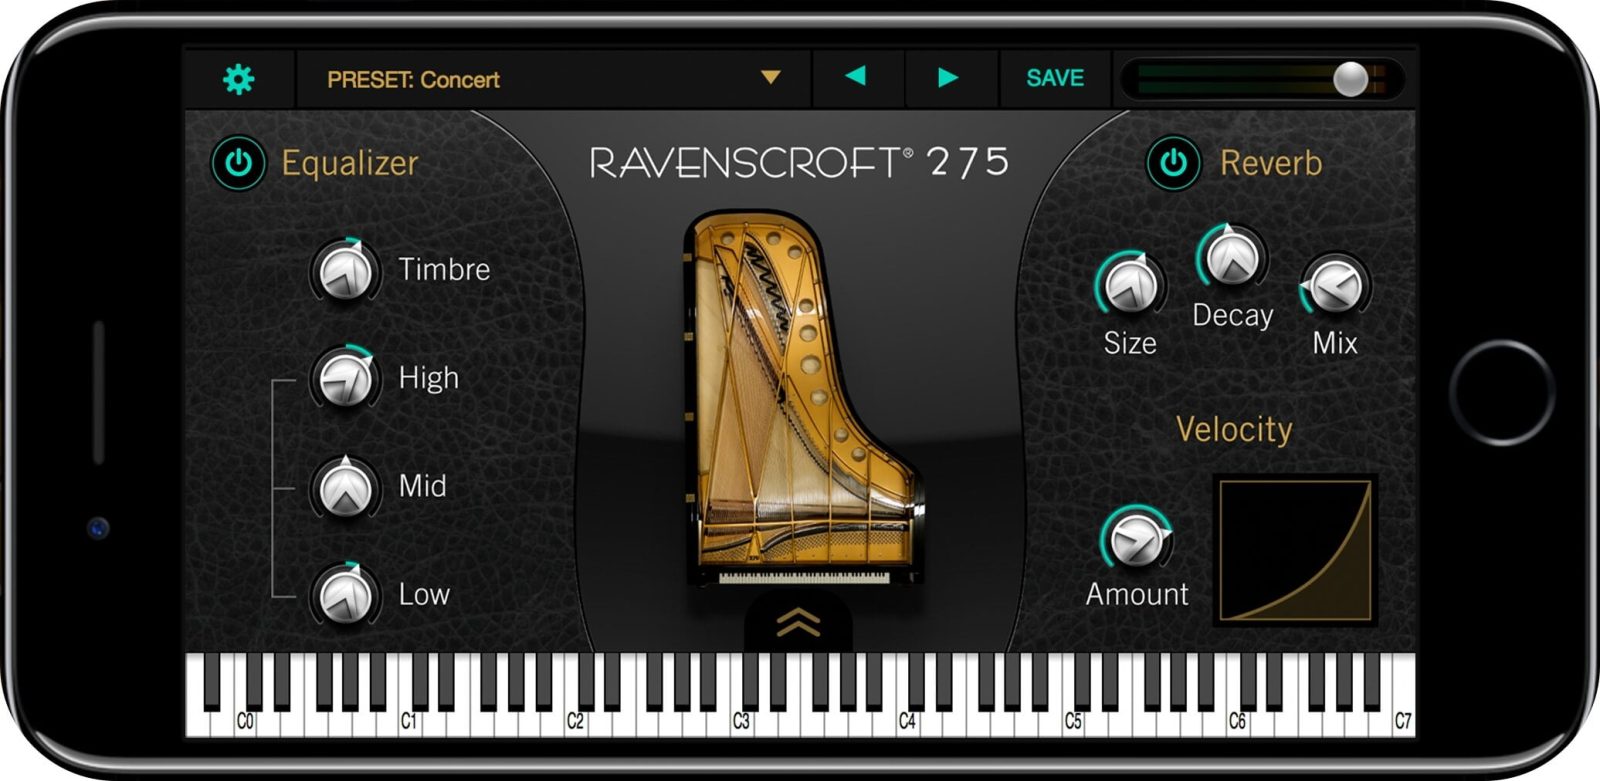 turn off pedal noise in ravenscroft 275 ios